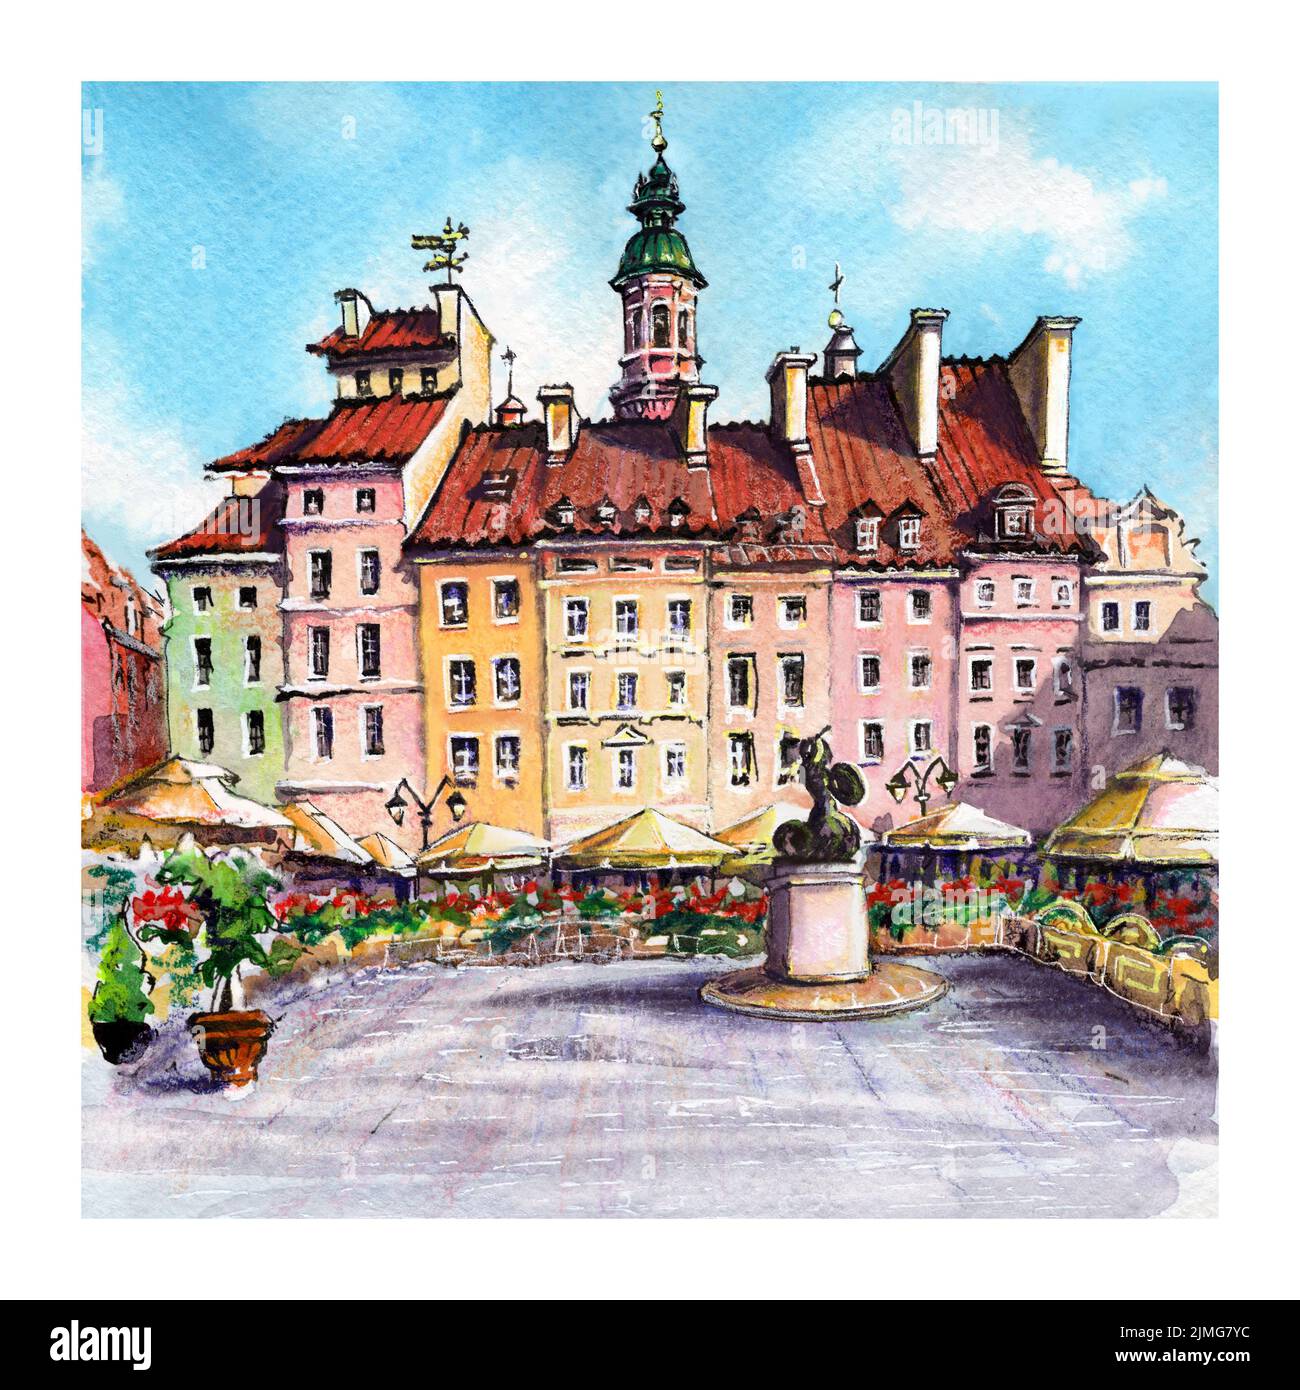 Watercolor sketch of Old Town Market Place in Warsaw Old town, Poland. Stock Photo